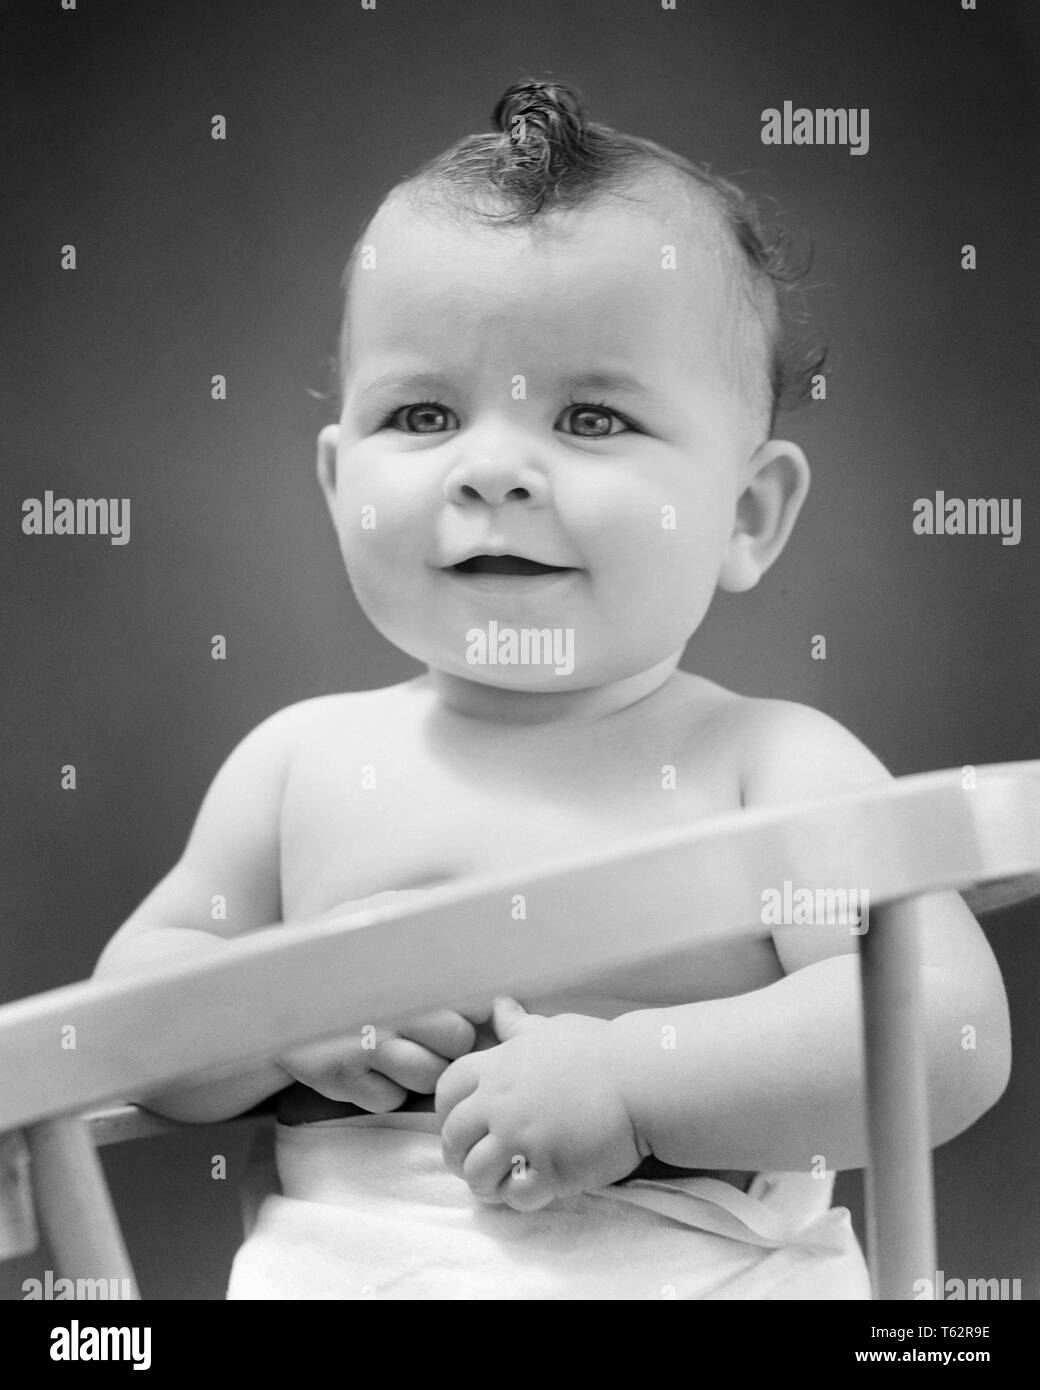 1940s PLEASANT ONE YEAR OLD  GIRL TODDLER SITTING UP IN SAFETY BABY CHAIR - b13446 HAR001 HARS ALERT CONTAINED PLEASANT GROWTH JUVENILES BABY GIRL BLACK AND WHITE CAUCASIAN ETHNICITY HAR001 OLD FASHIONED Stock Photo